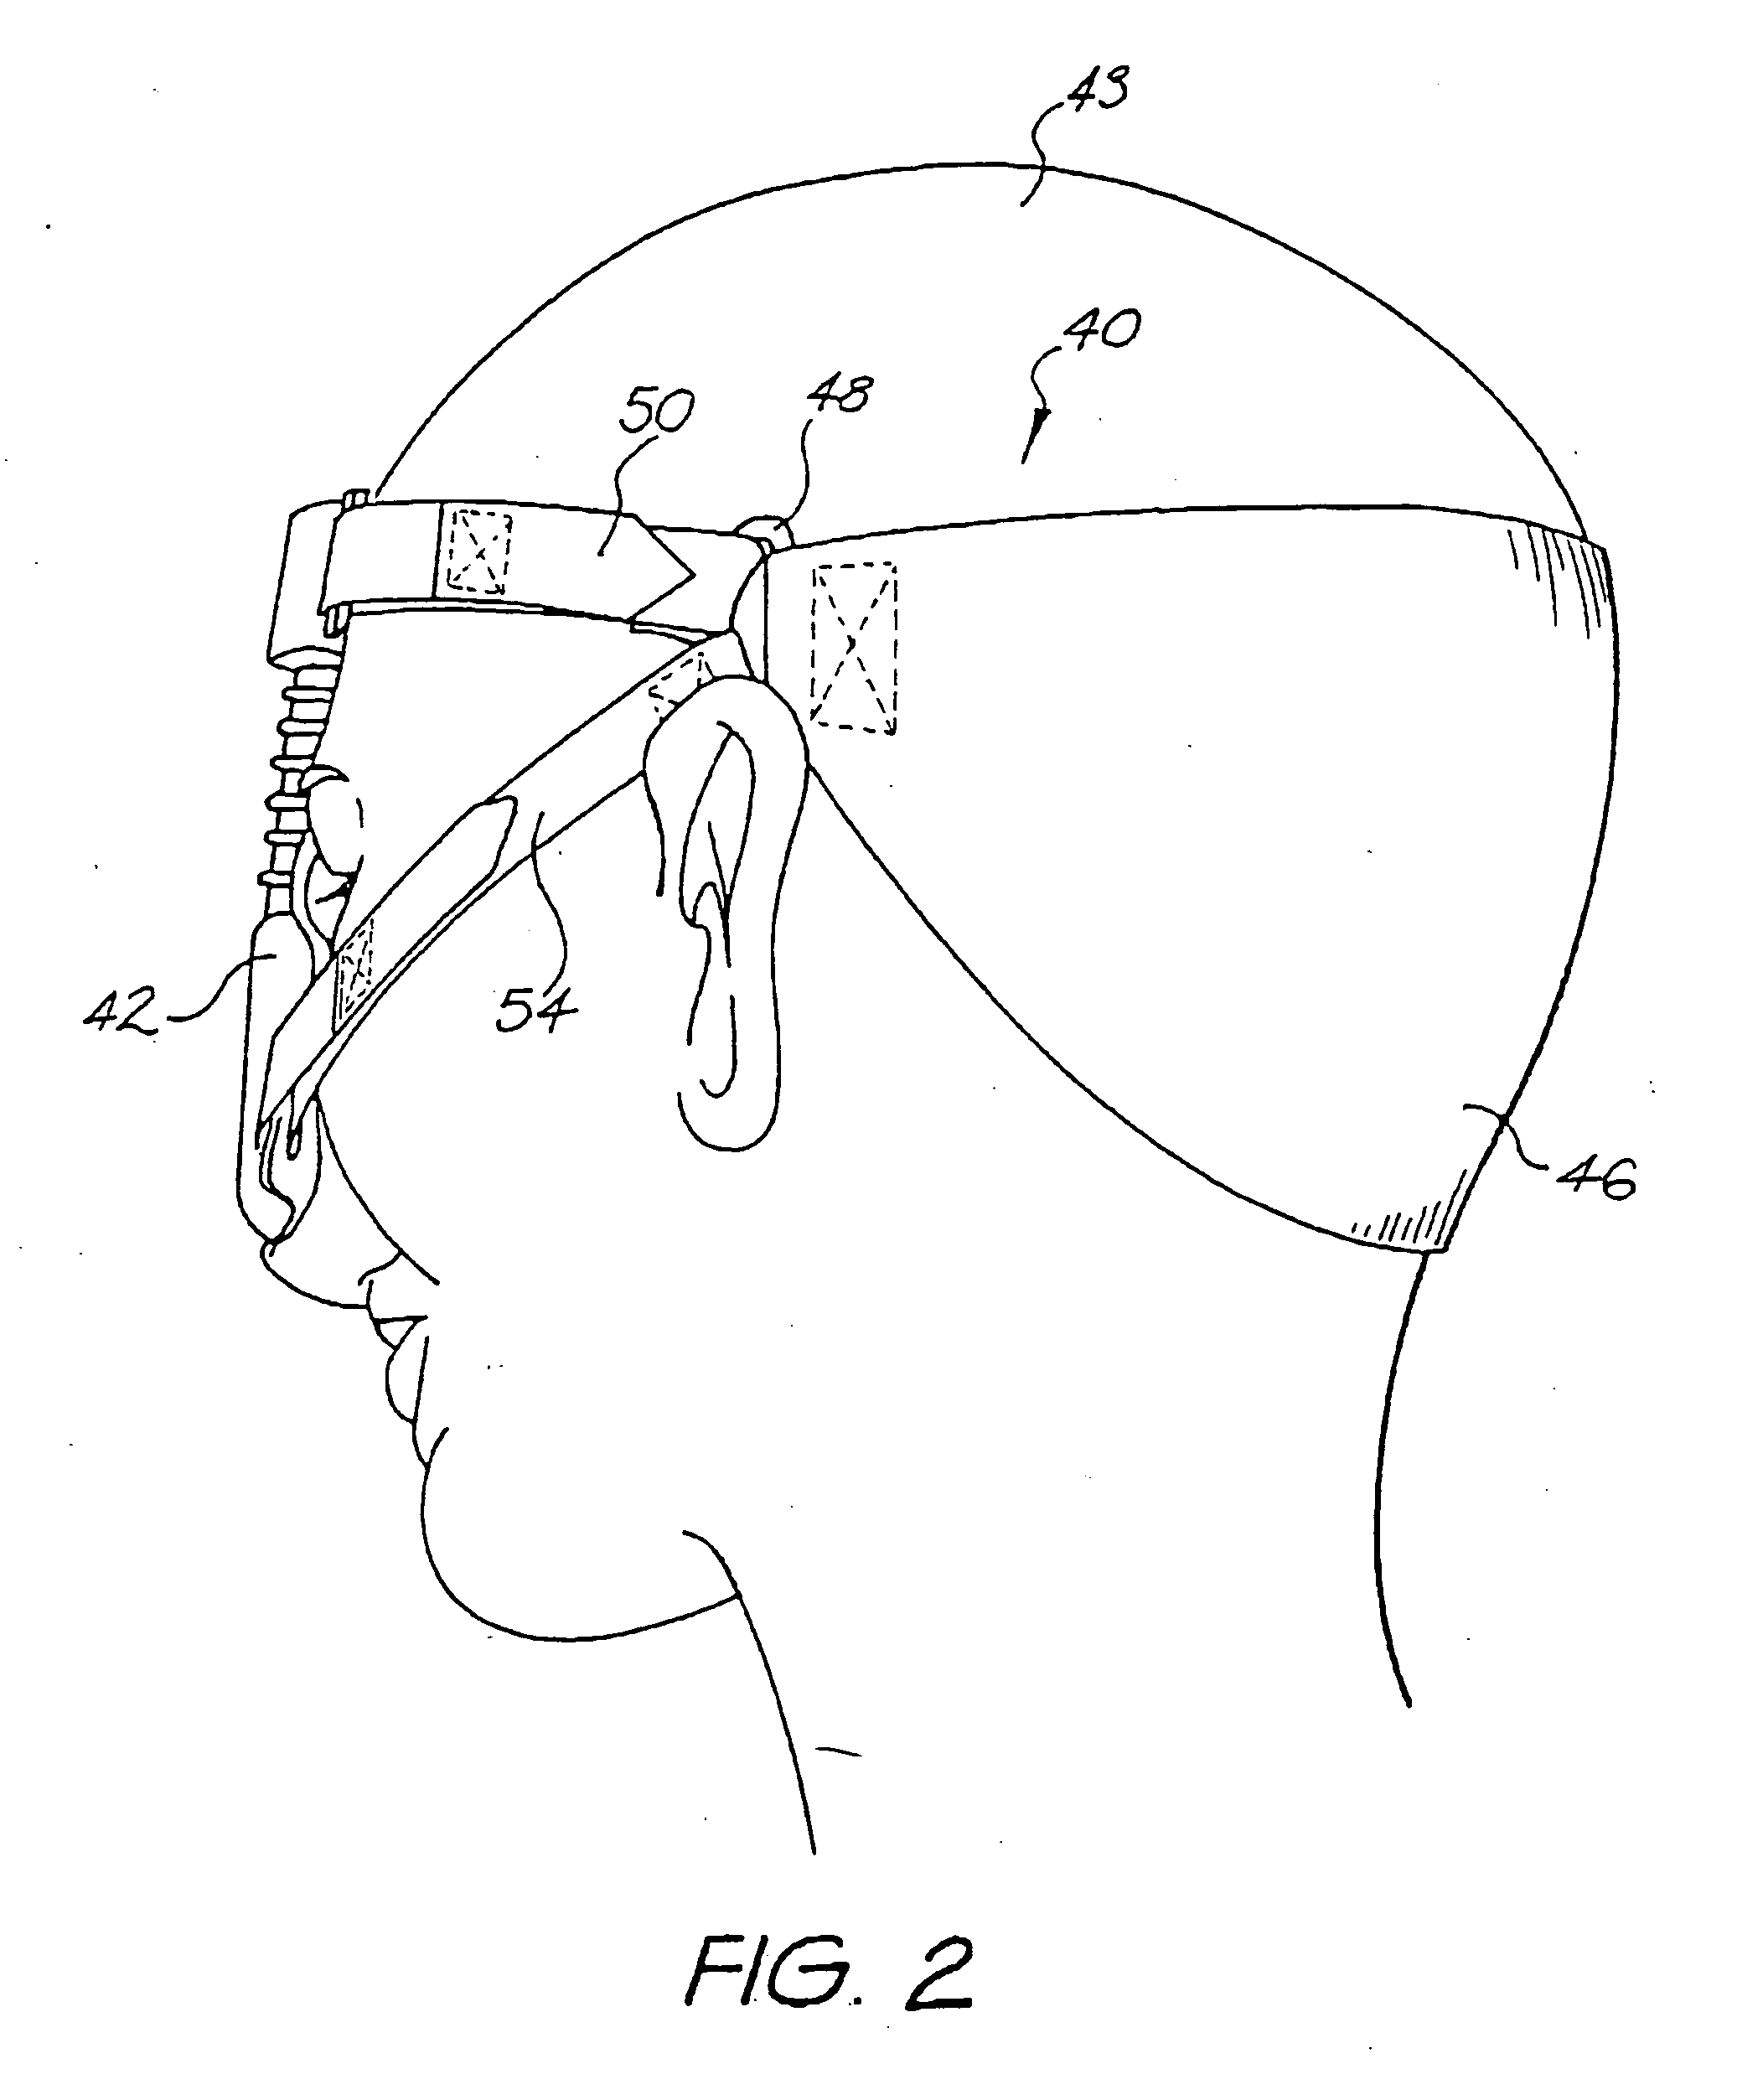 Harness assembly for a nasal mask